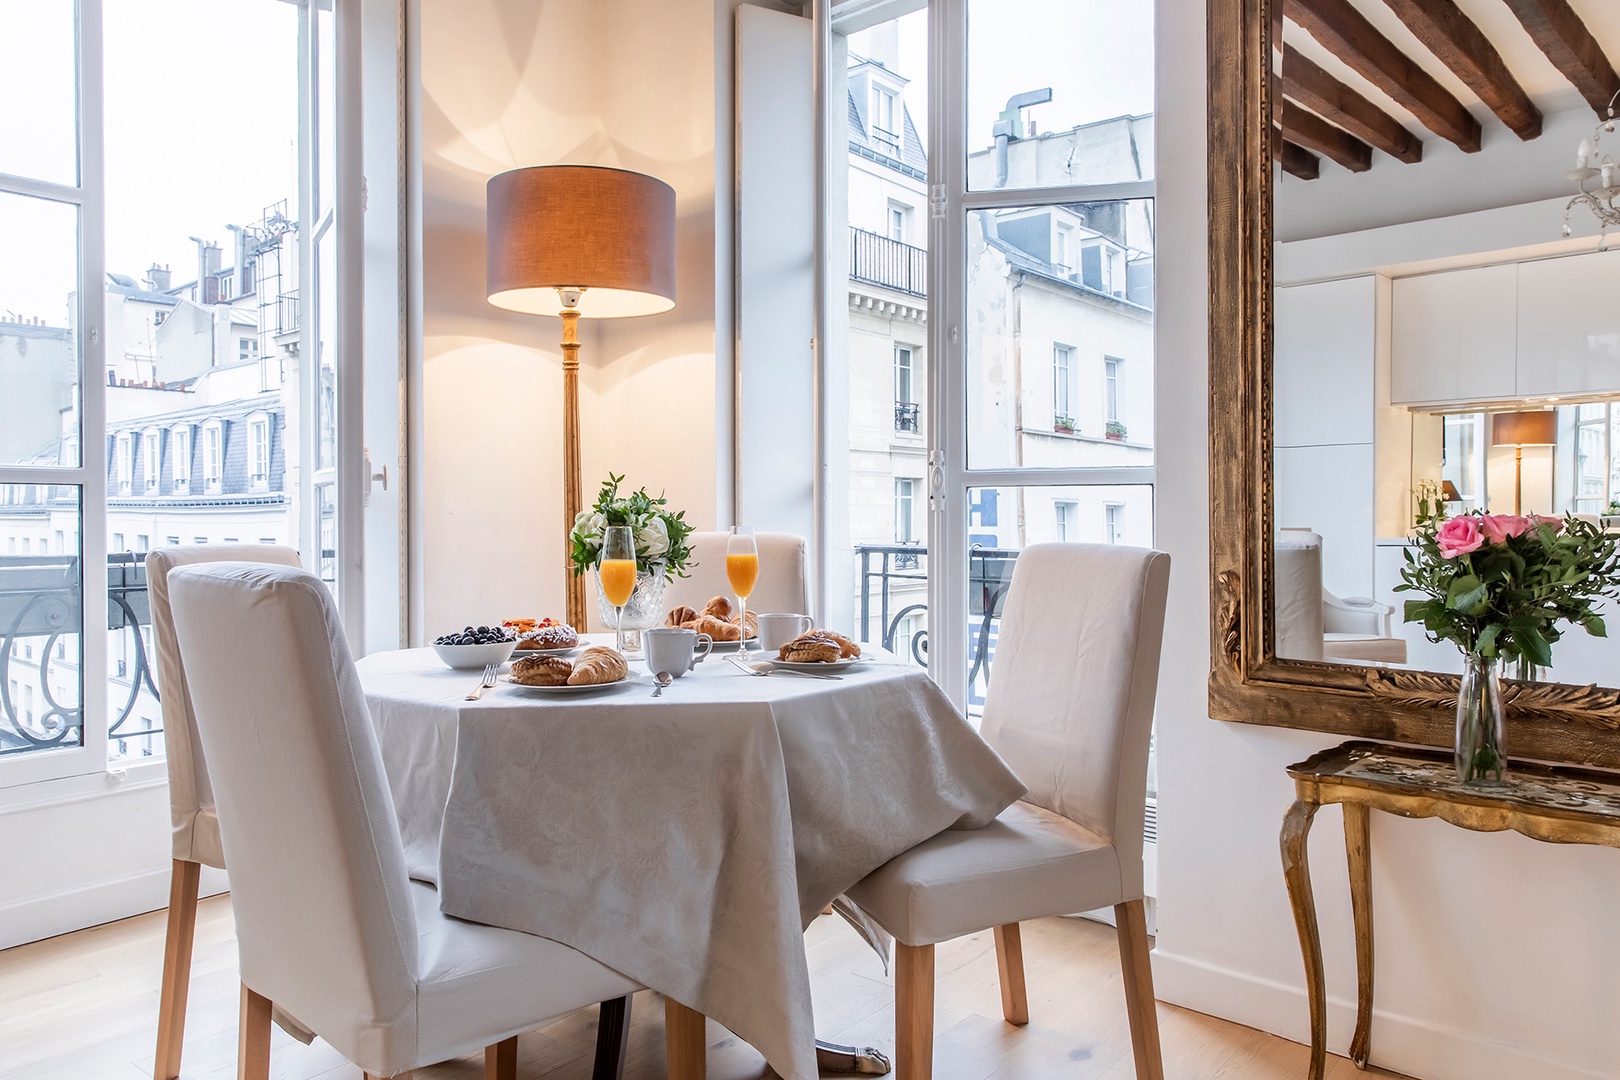 Start your day with a French breakfast and stunning views of Paris!